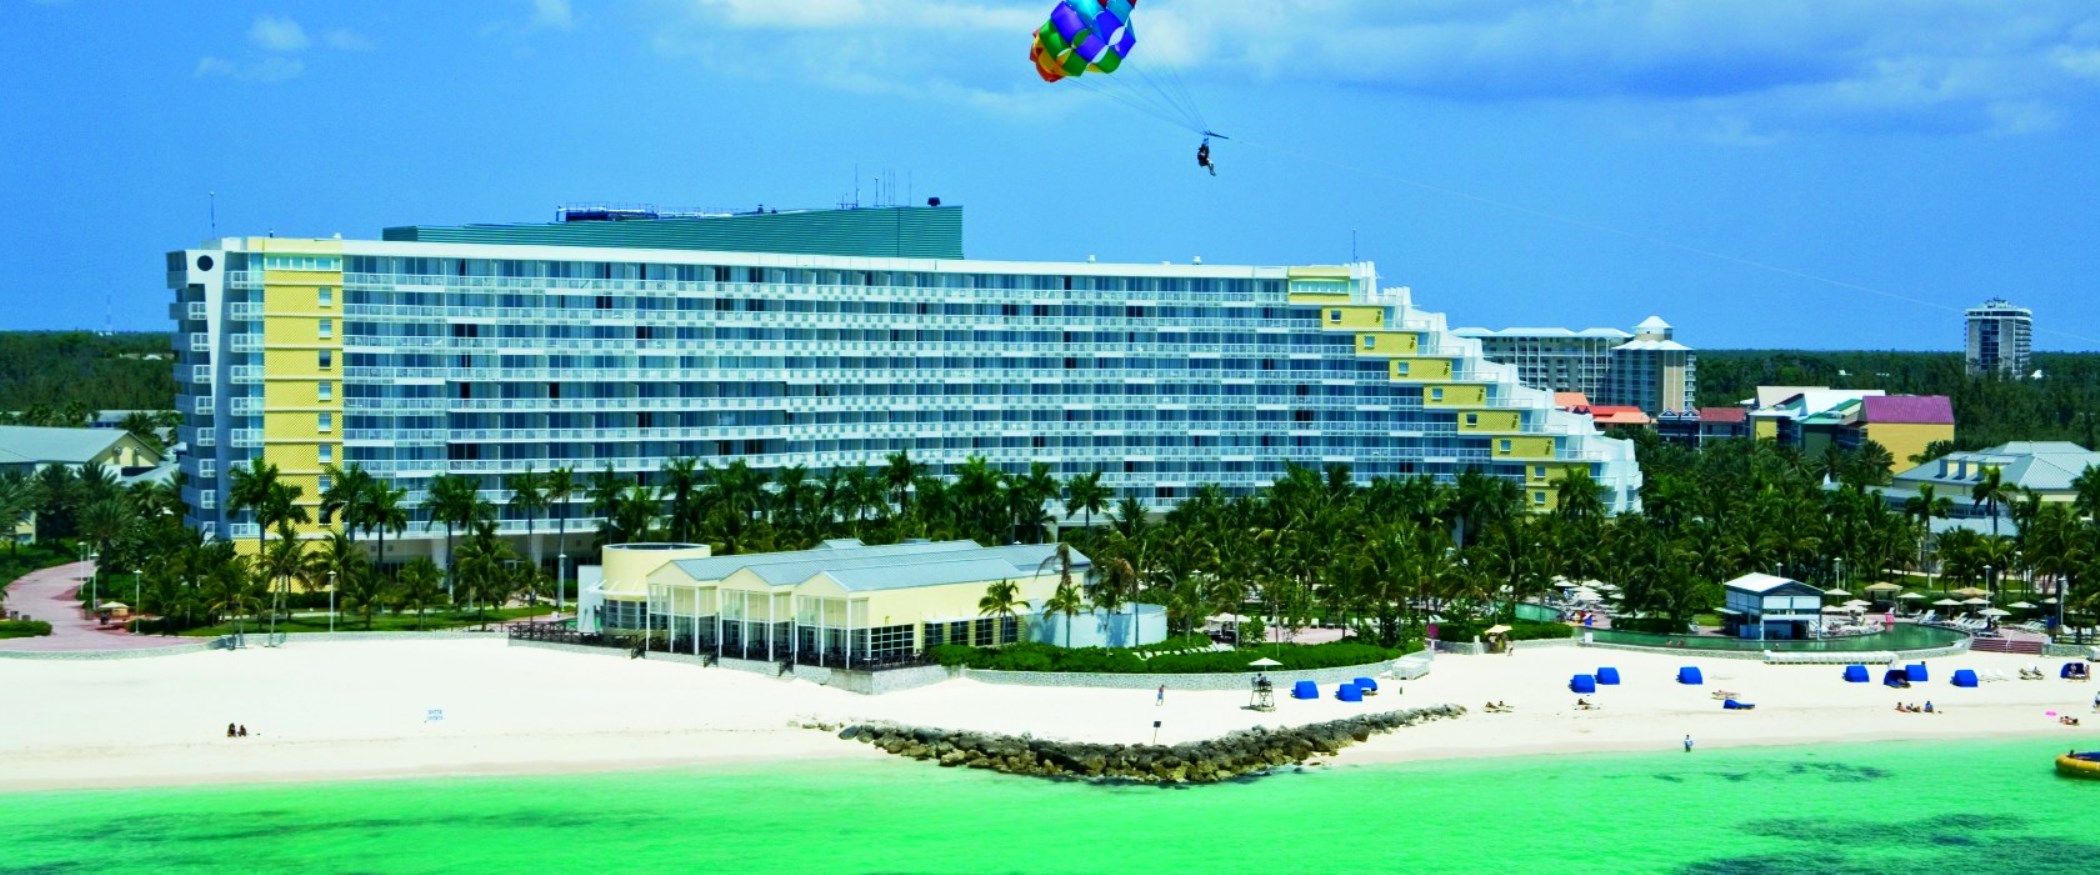 Lighthouse Pointe at Grand Lucayan Resort - All Inclusive image